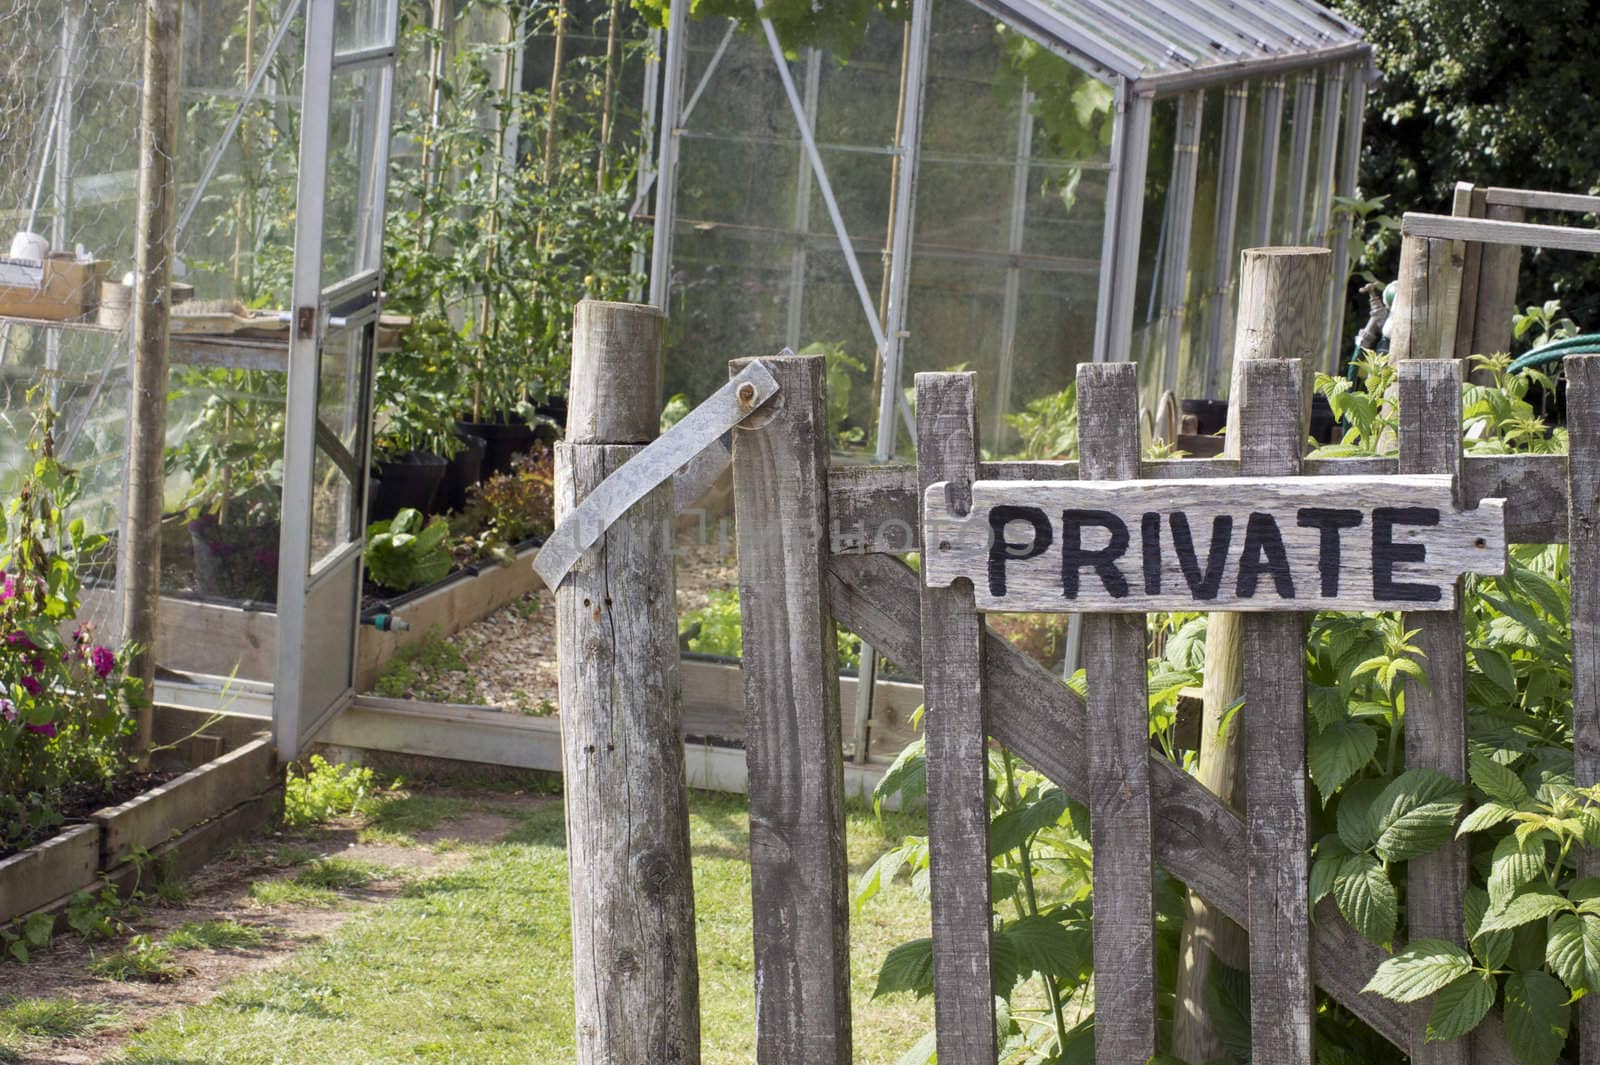 A wooden garden gate with a hand painted sign with the word private nailed to its front. The gate is the entrance to a vegetable garden and allotment located in rural Devonshire countryside, England. A glass greenhouse is visible to the background.